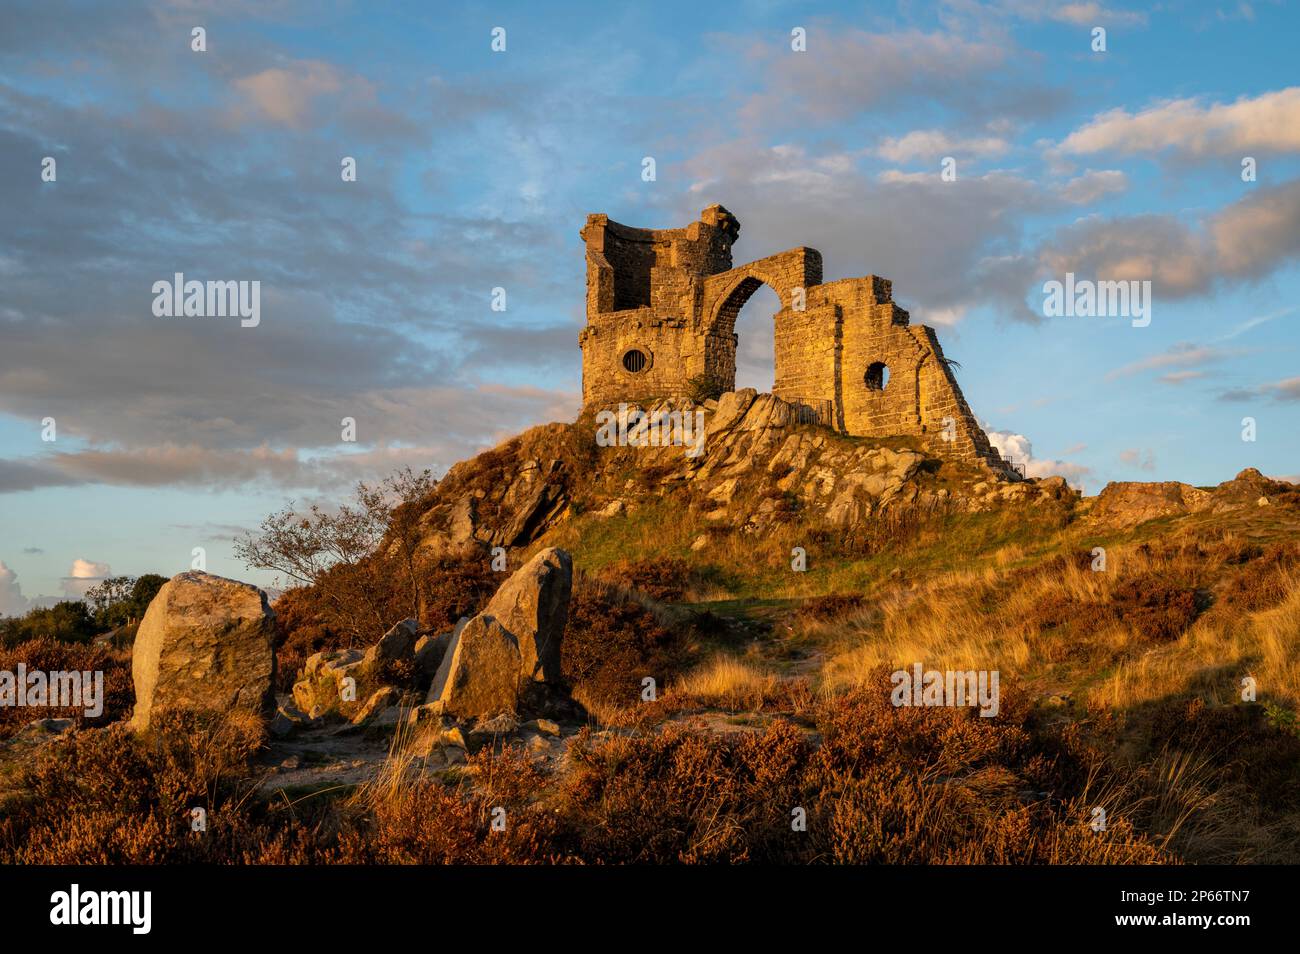 The Mow Cop Folly on the Cheshire and Staffordshire border, Cheshire, England, United Kingdom, Europe Stock Photo